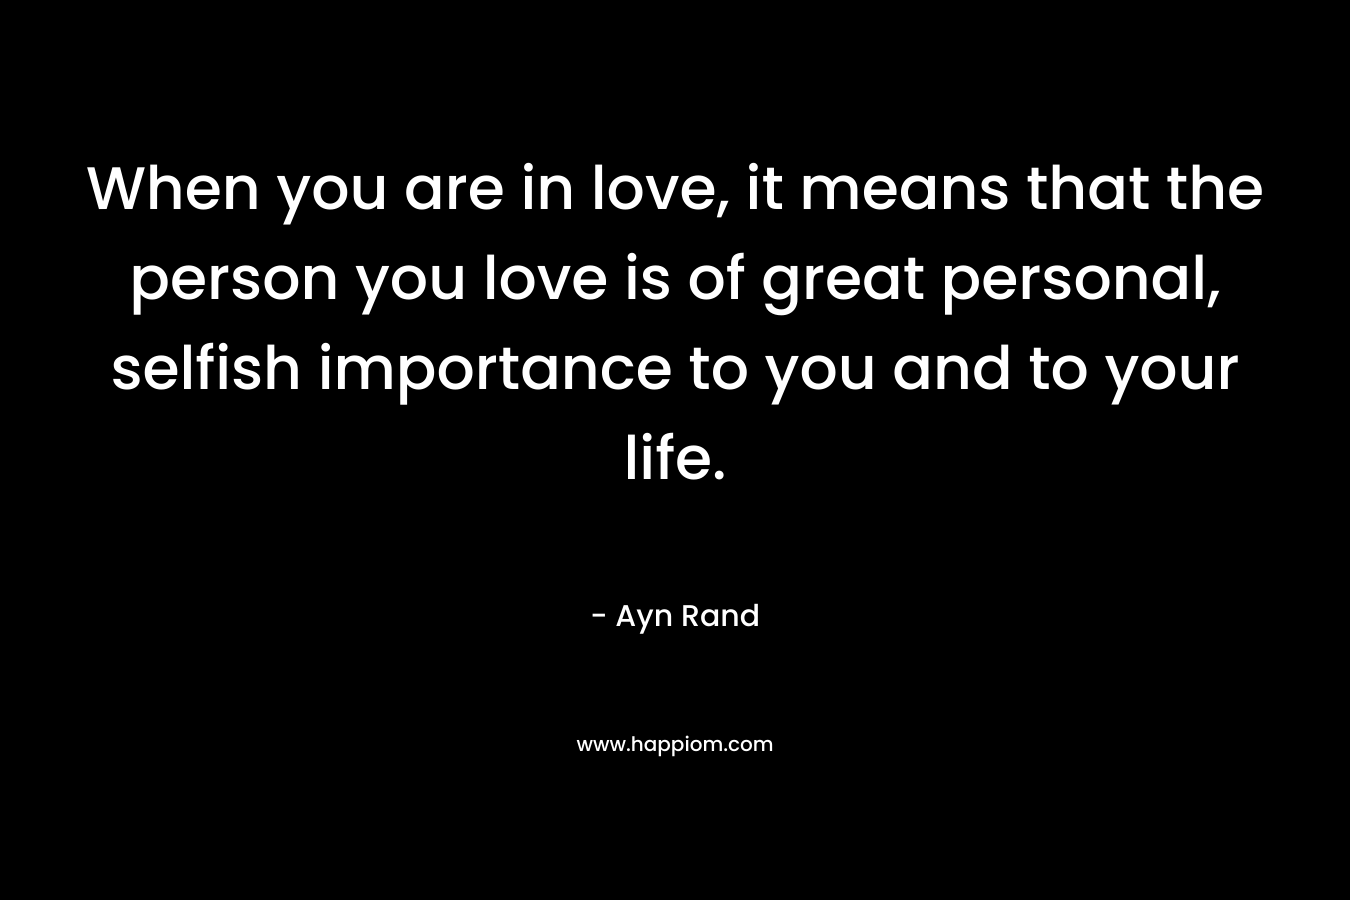 When you are in love, it means that the person you love is of great personal, selfish importance to you and to your life. – Ayn Rand